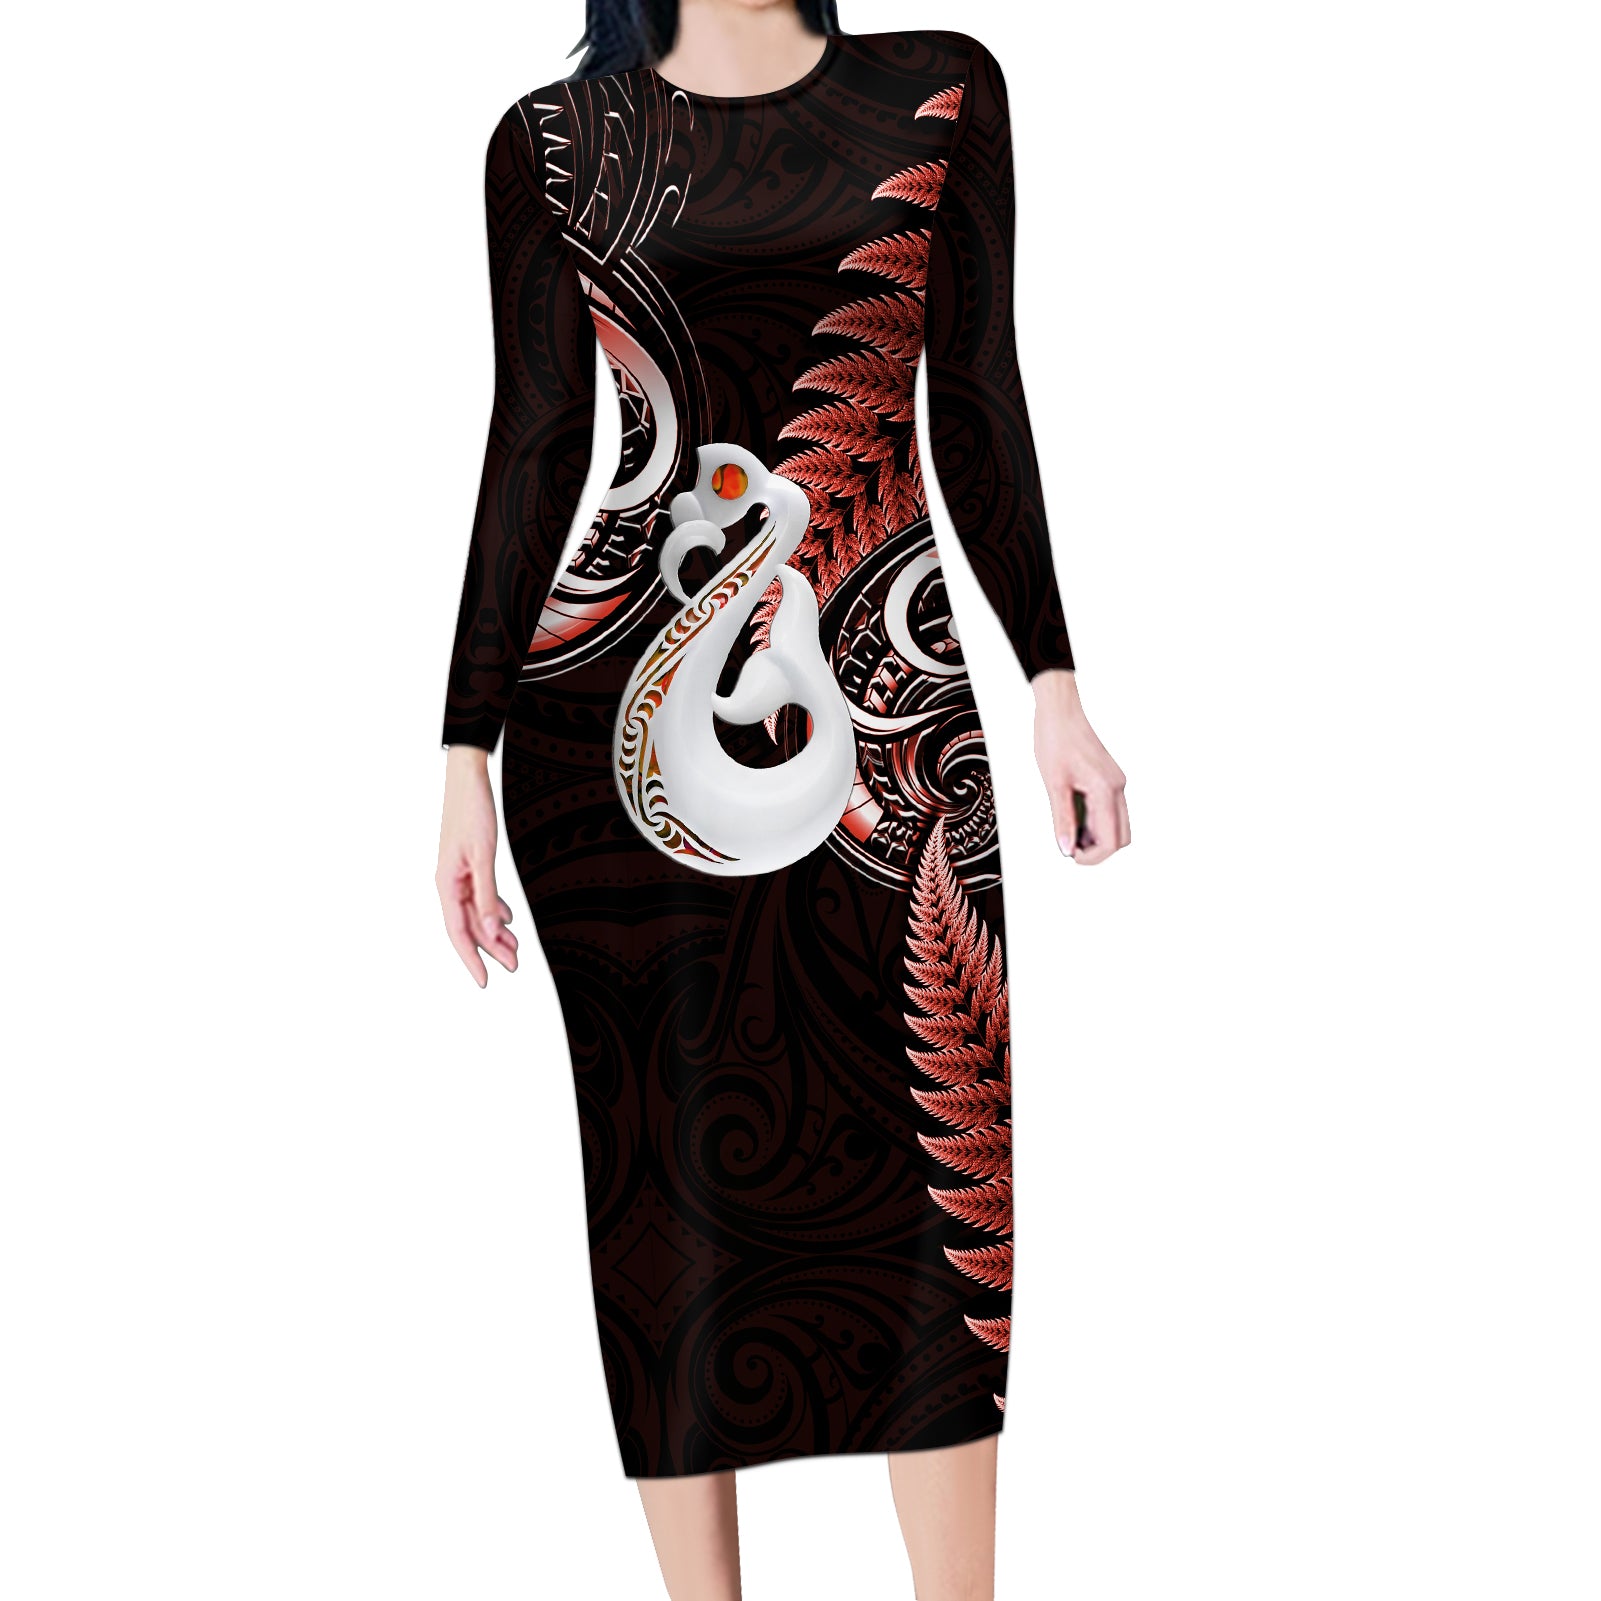 Personalised New Zealand Long Sleeve Bodycon Dress Aotearoa Silver Fern With Manaia Maori Unique Red LT14 Long Dress Red - Polynesian Pride